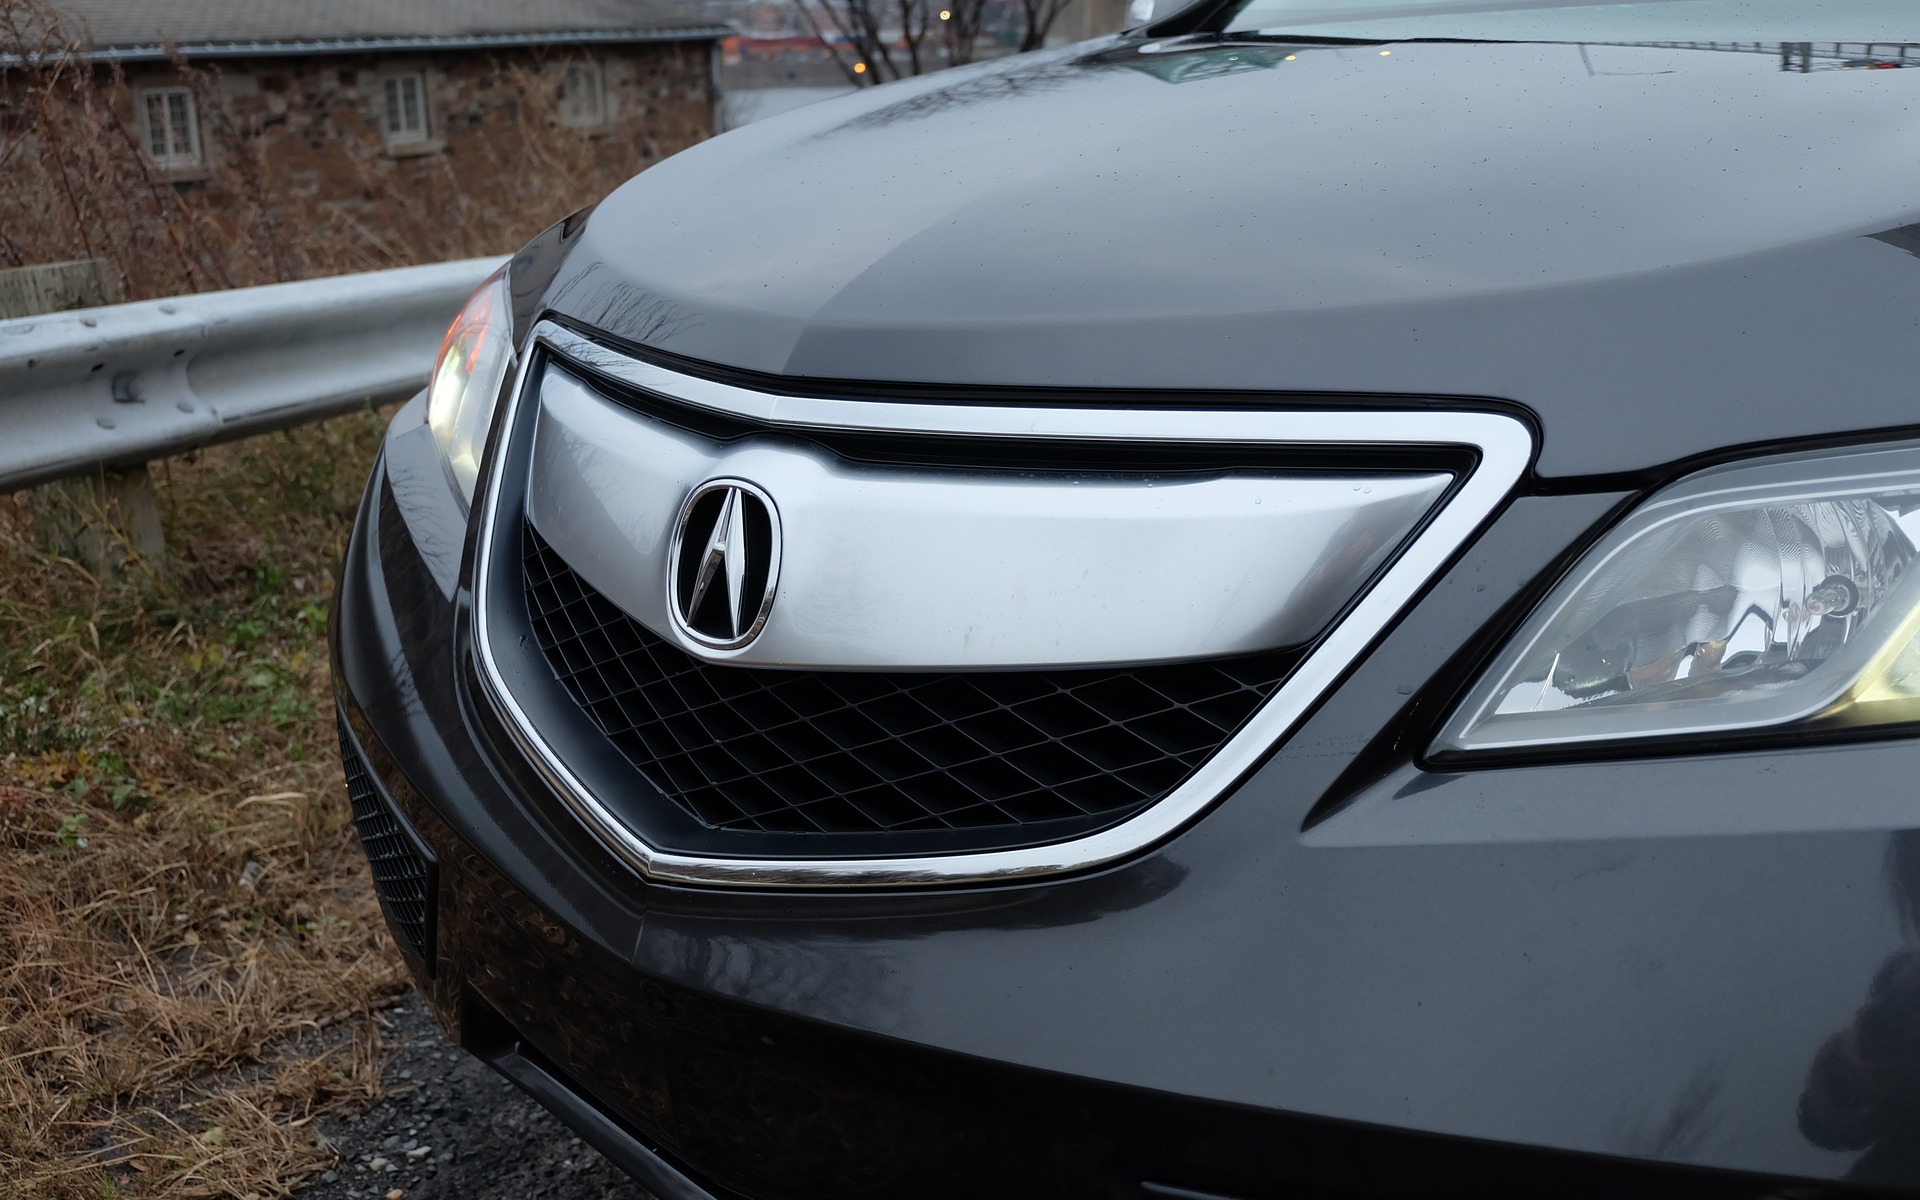 Like it or not, the Acura "bird's beak" is here to stay.